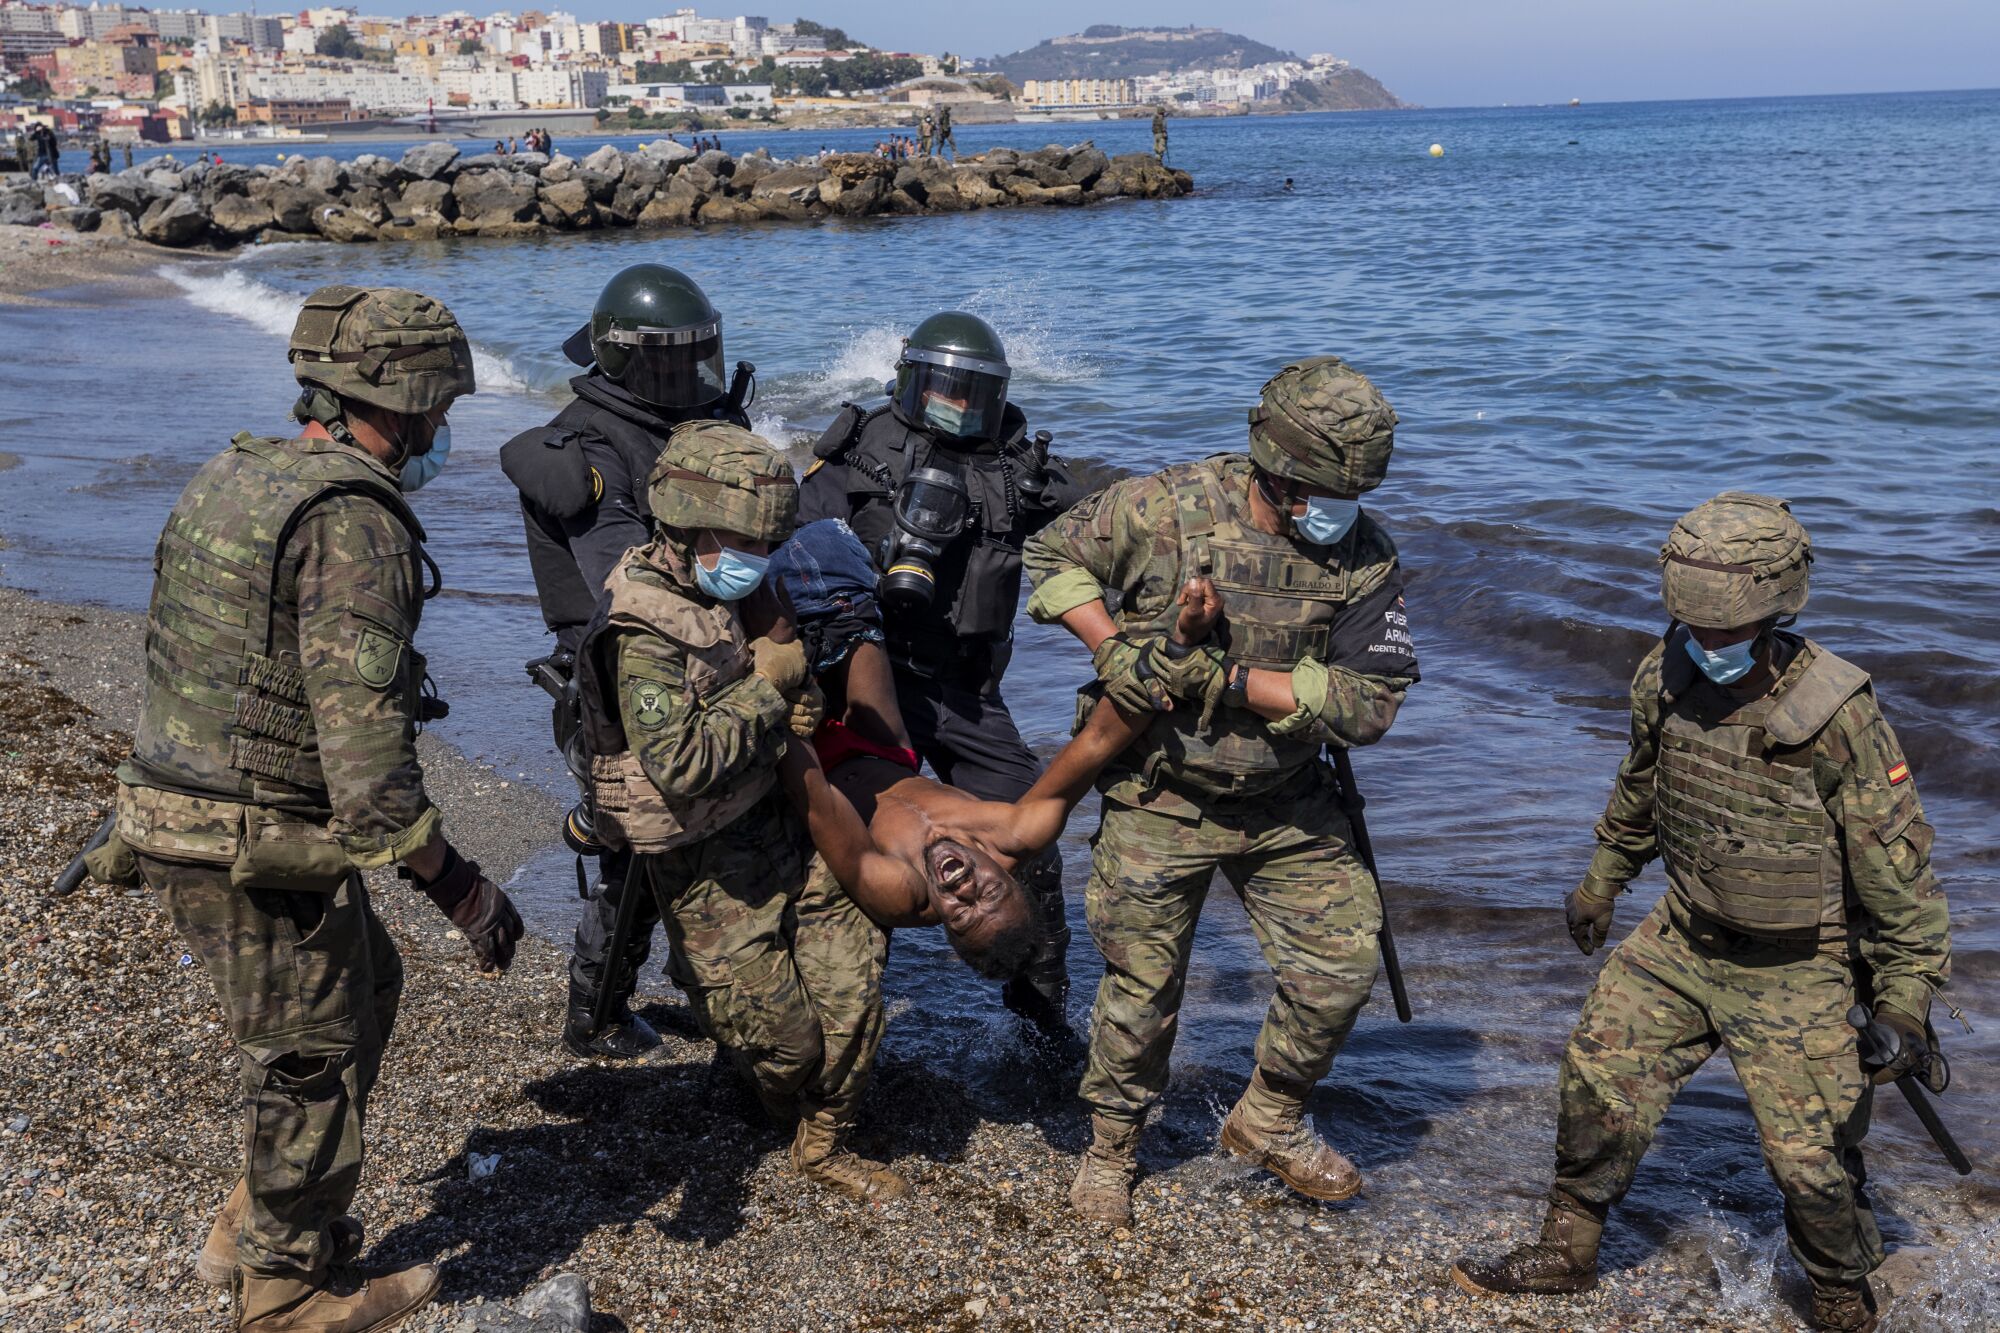 A screaming man is carried along a beach by soldiers gripping each of his limbs